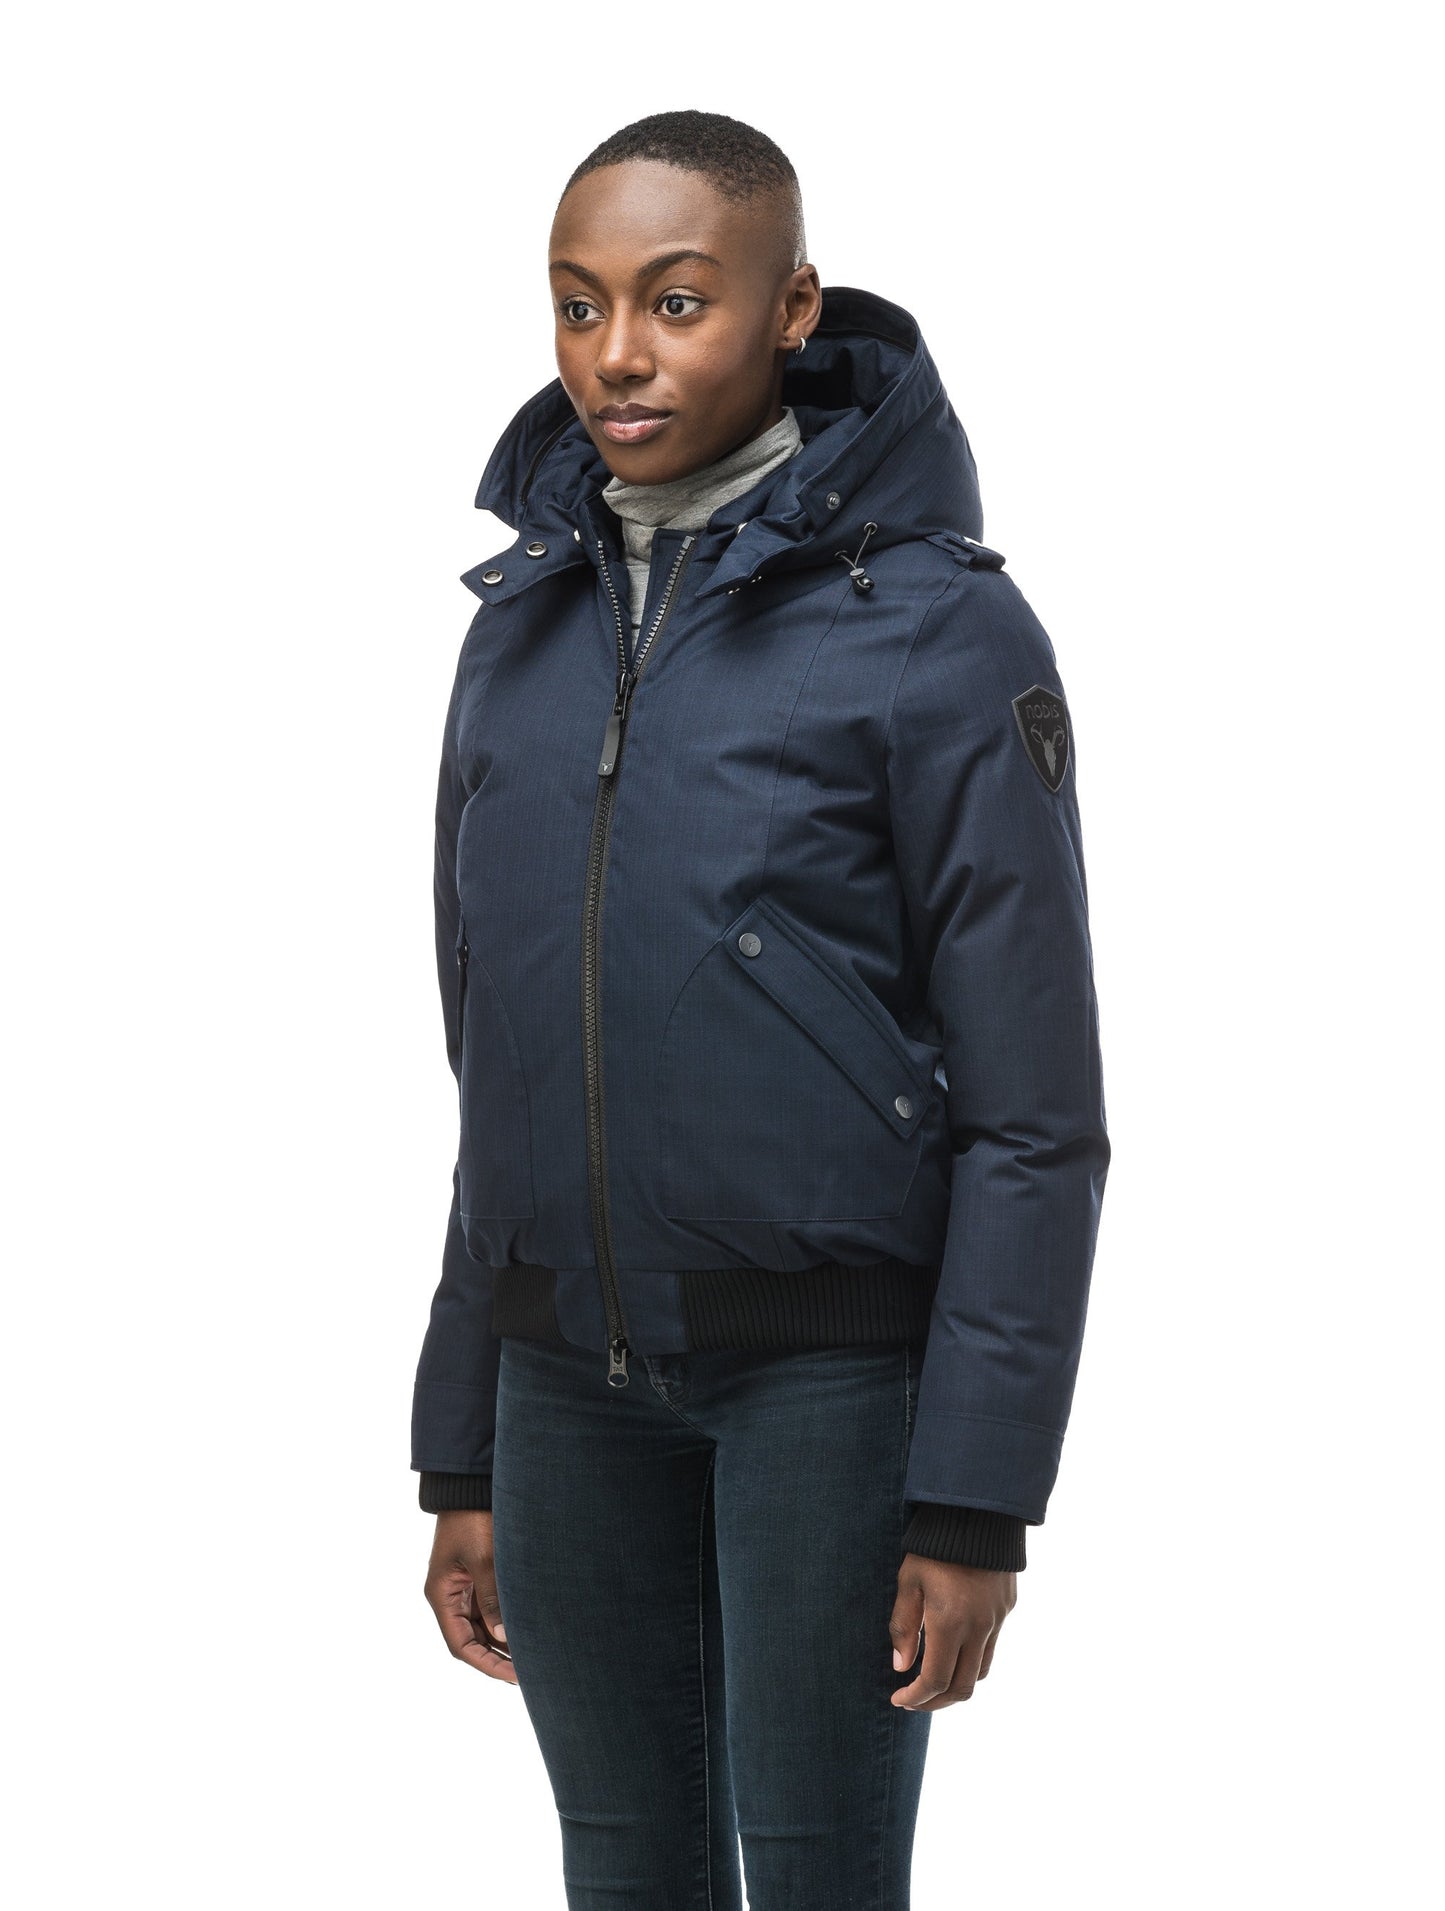 Women's bomber style down filled jacket with a removable hood and fur trim in CH Navy